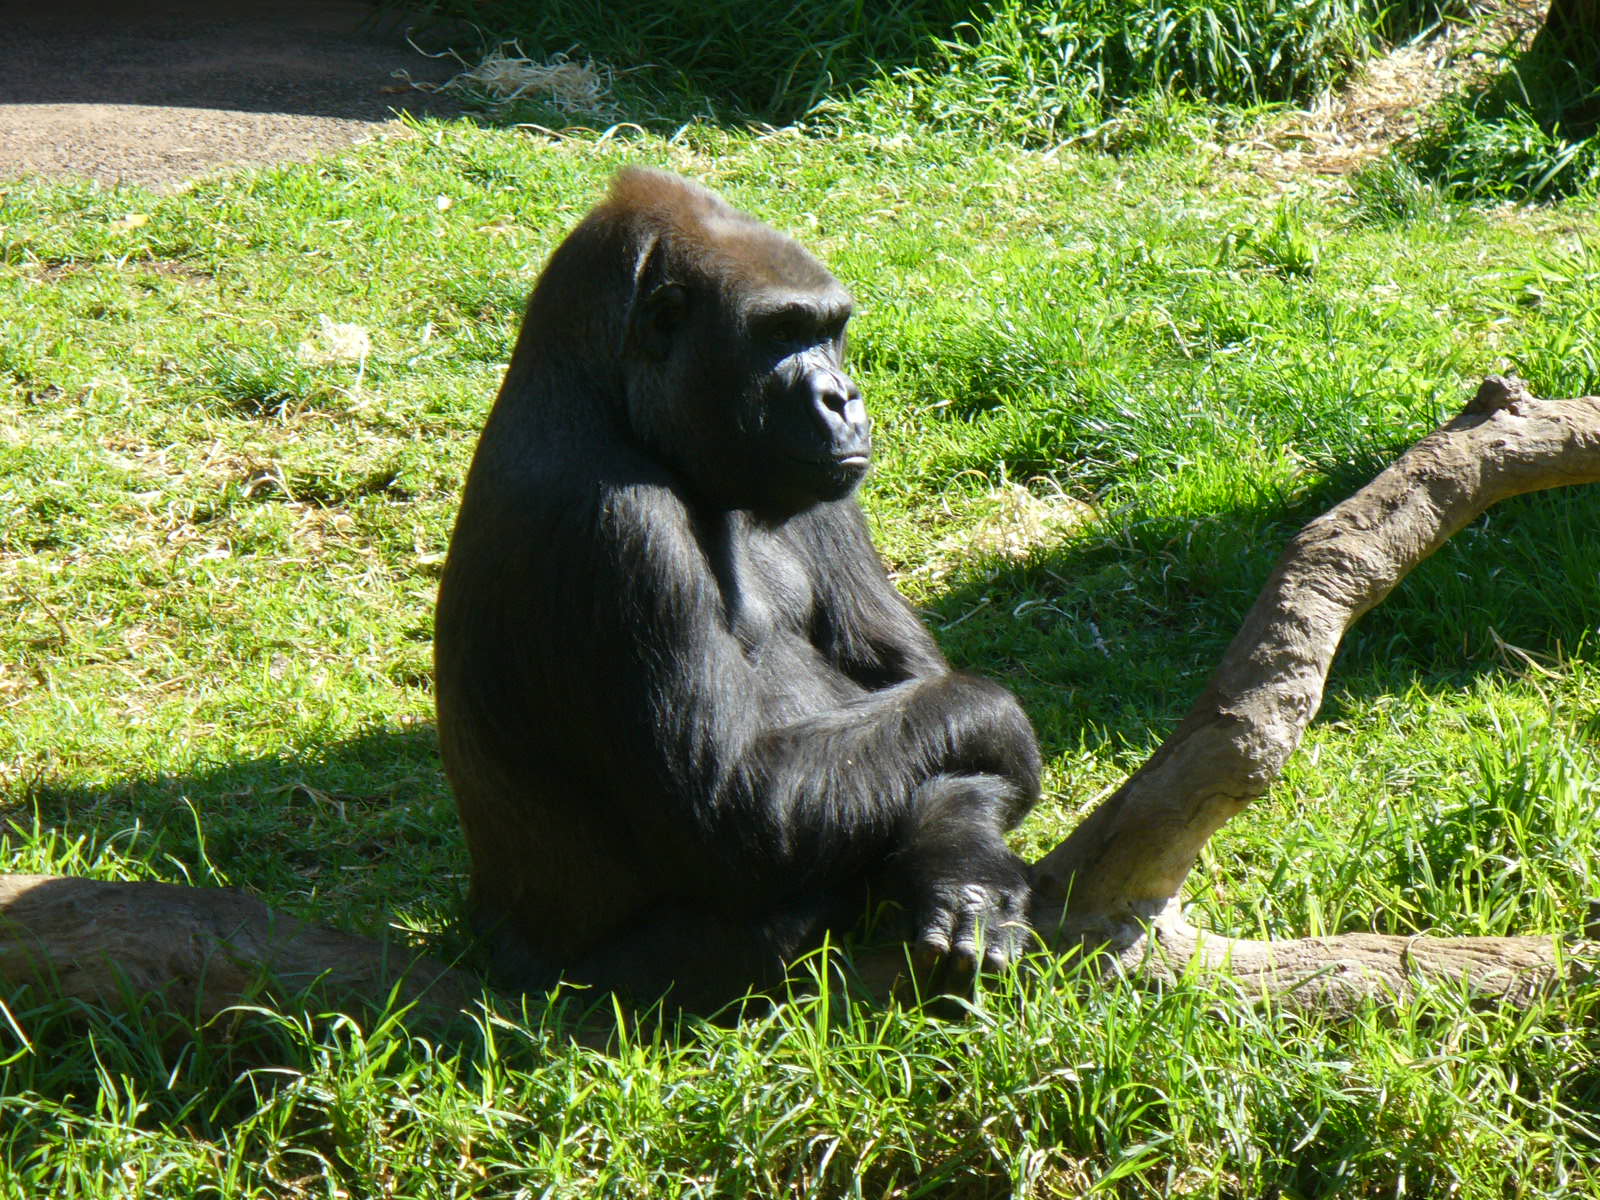 an older gorilla is seated next to a large log